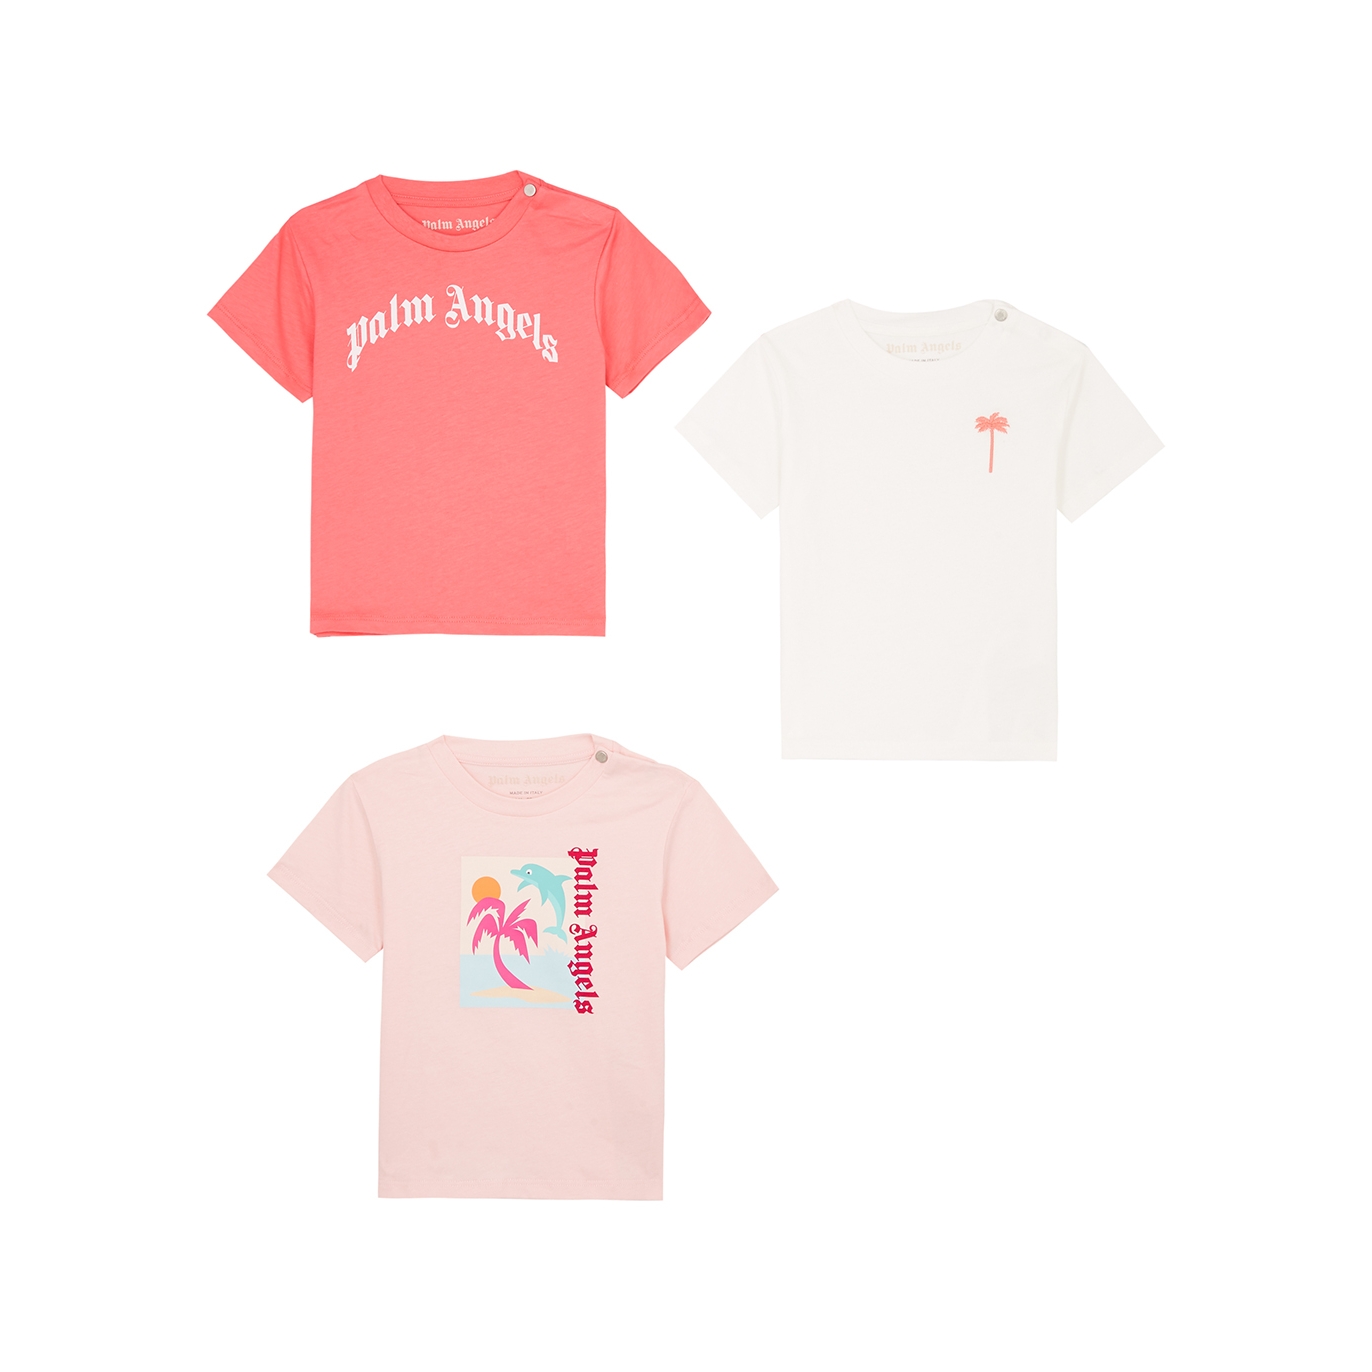 Logo Cotton T Shirt in Red - Palm Angels Kids